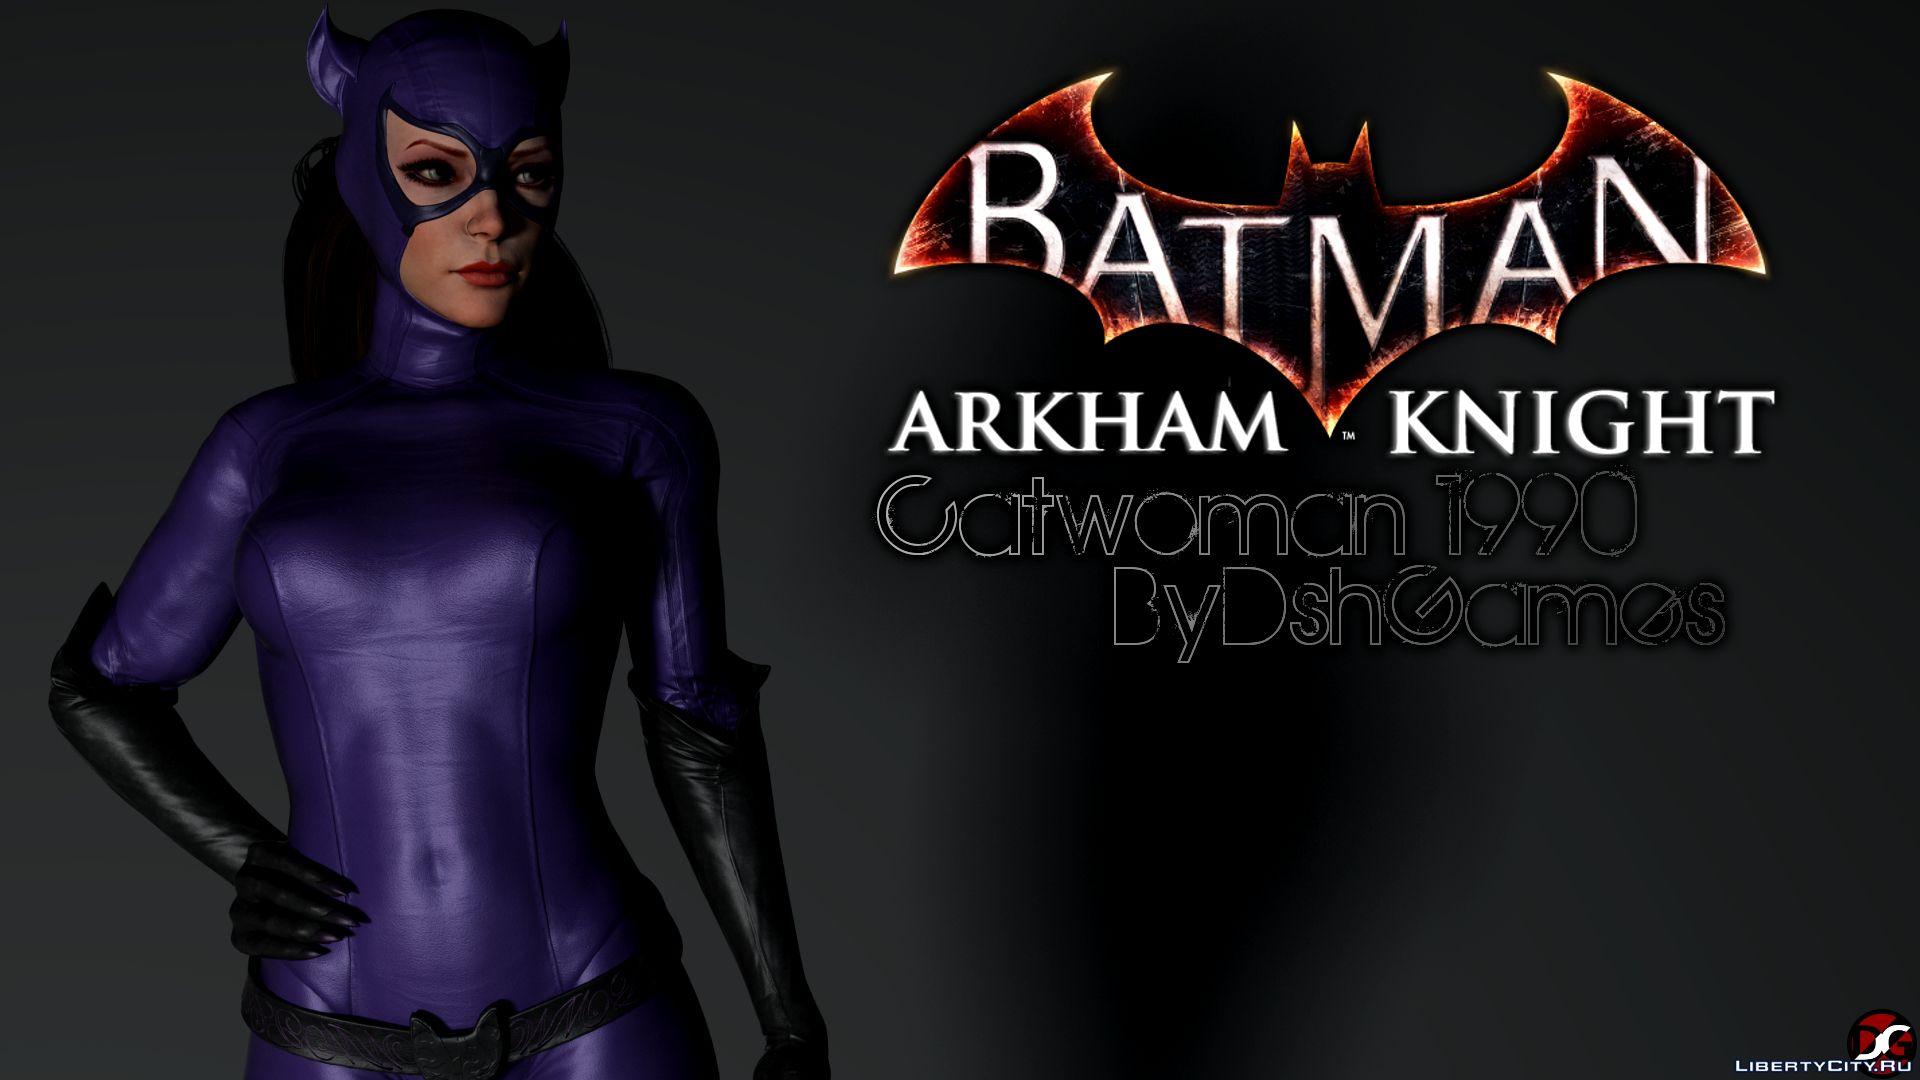 Download Catwoman 1990 from Batman Arkham Knight for GTA San Andreas